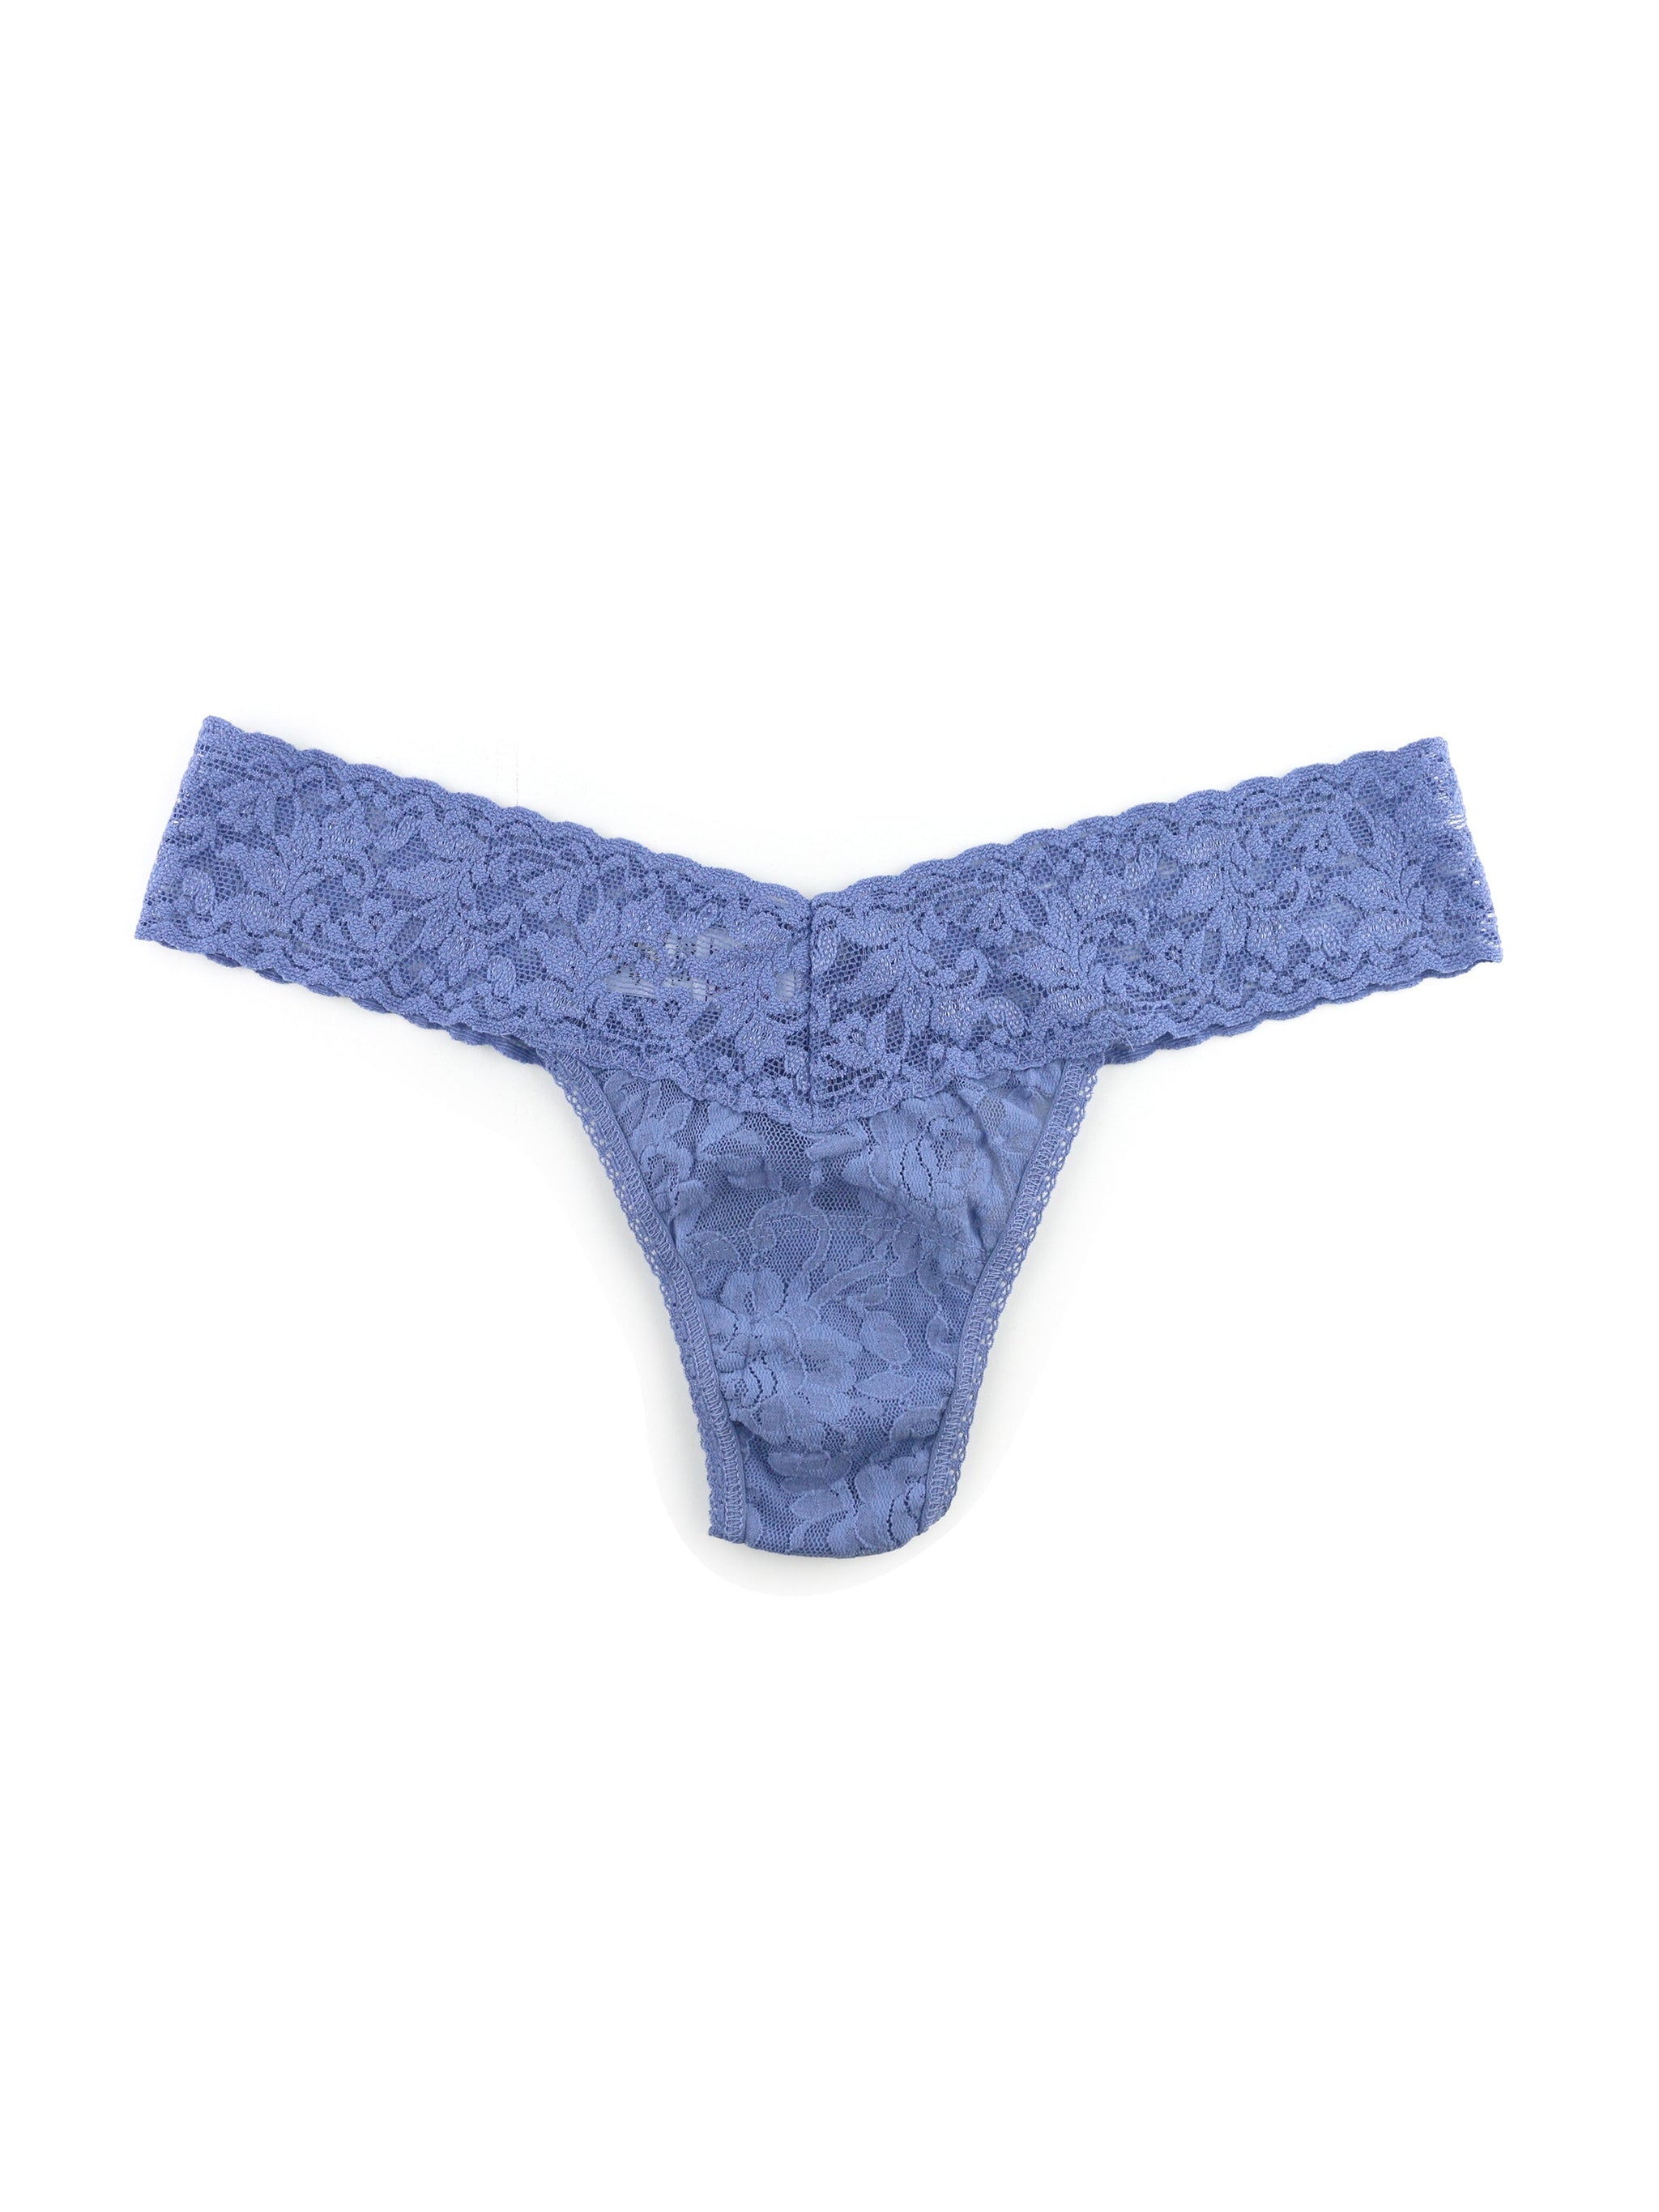 Signature Lace Low Rise Thong Chambray